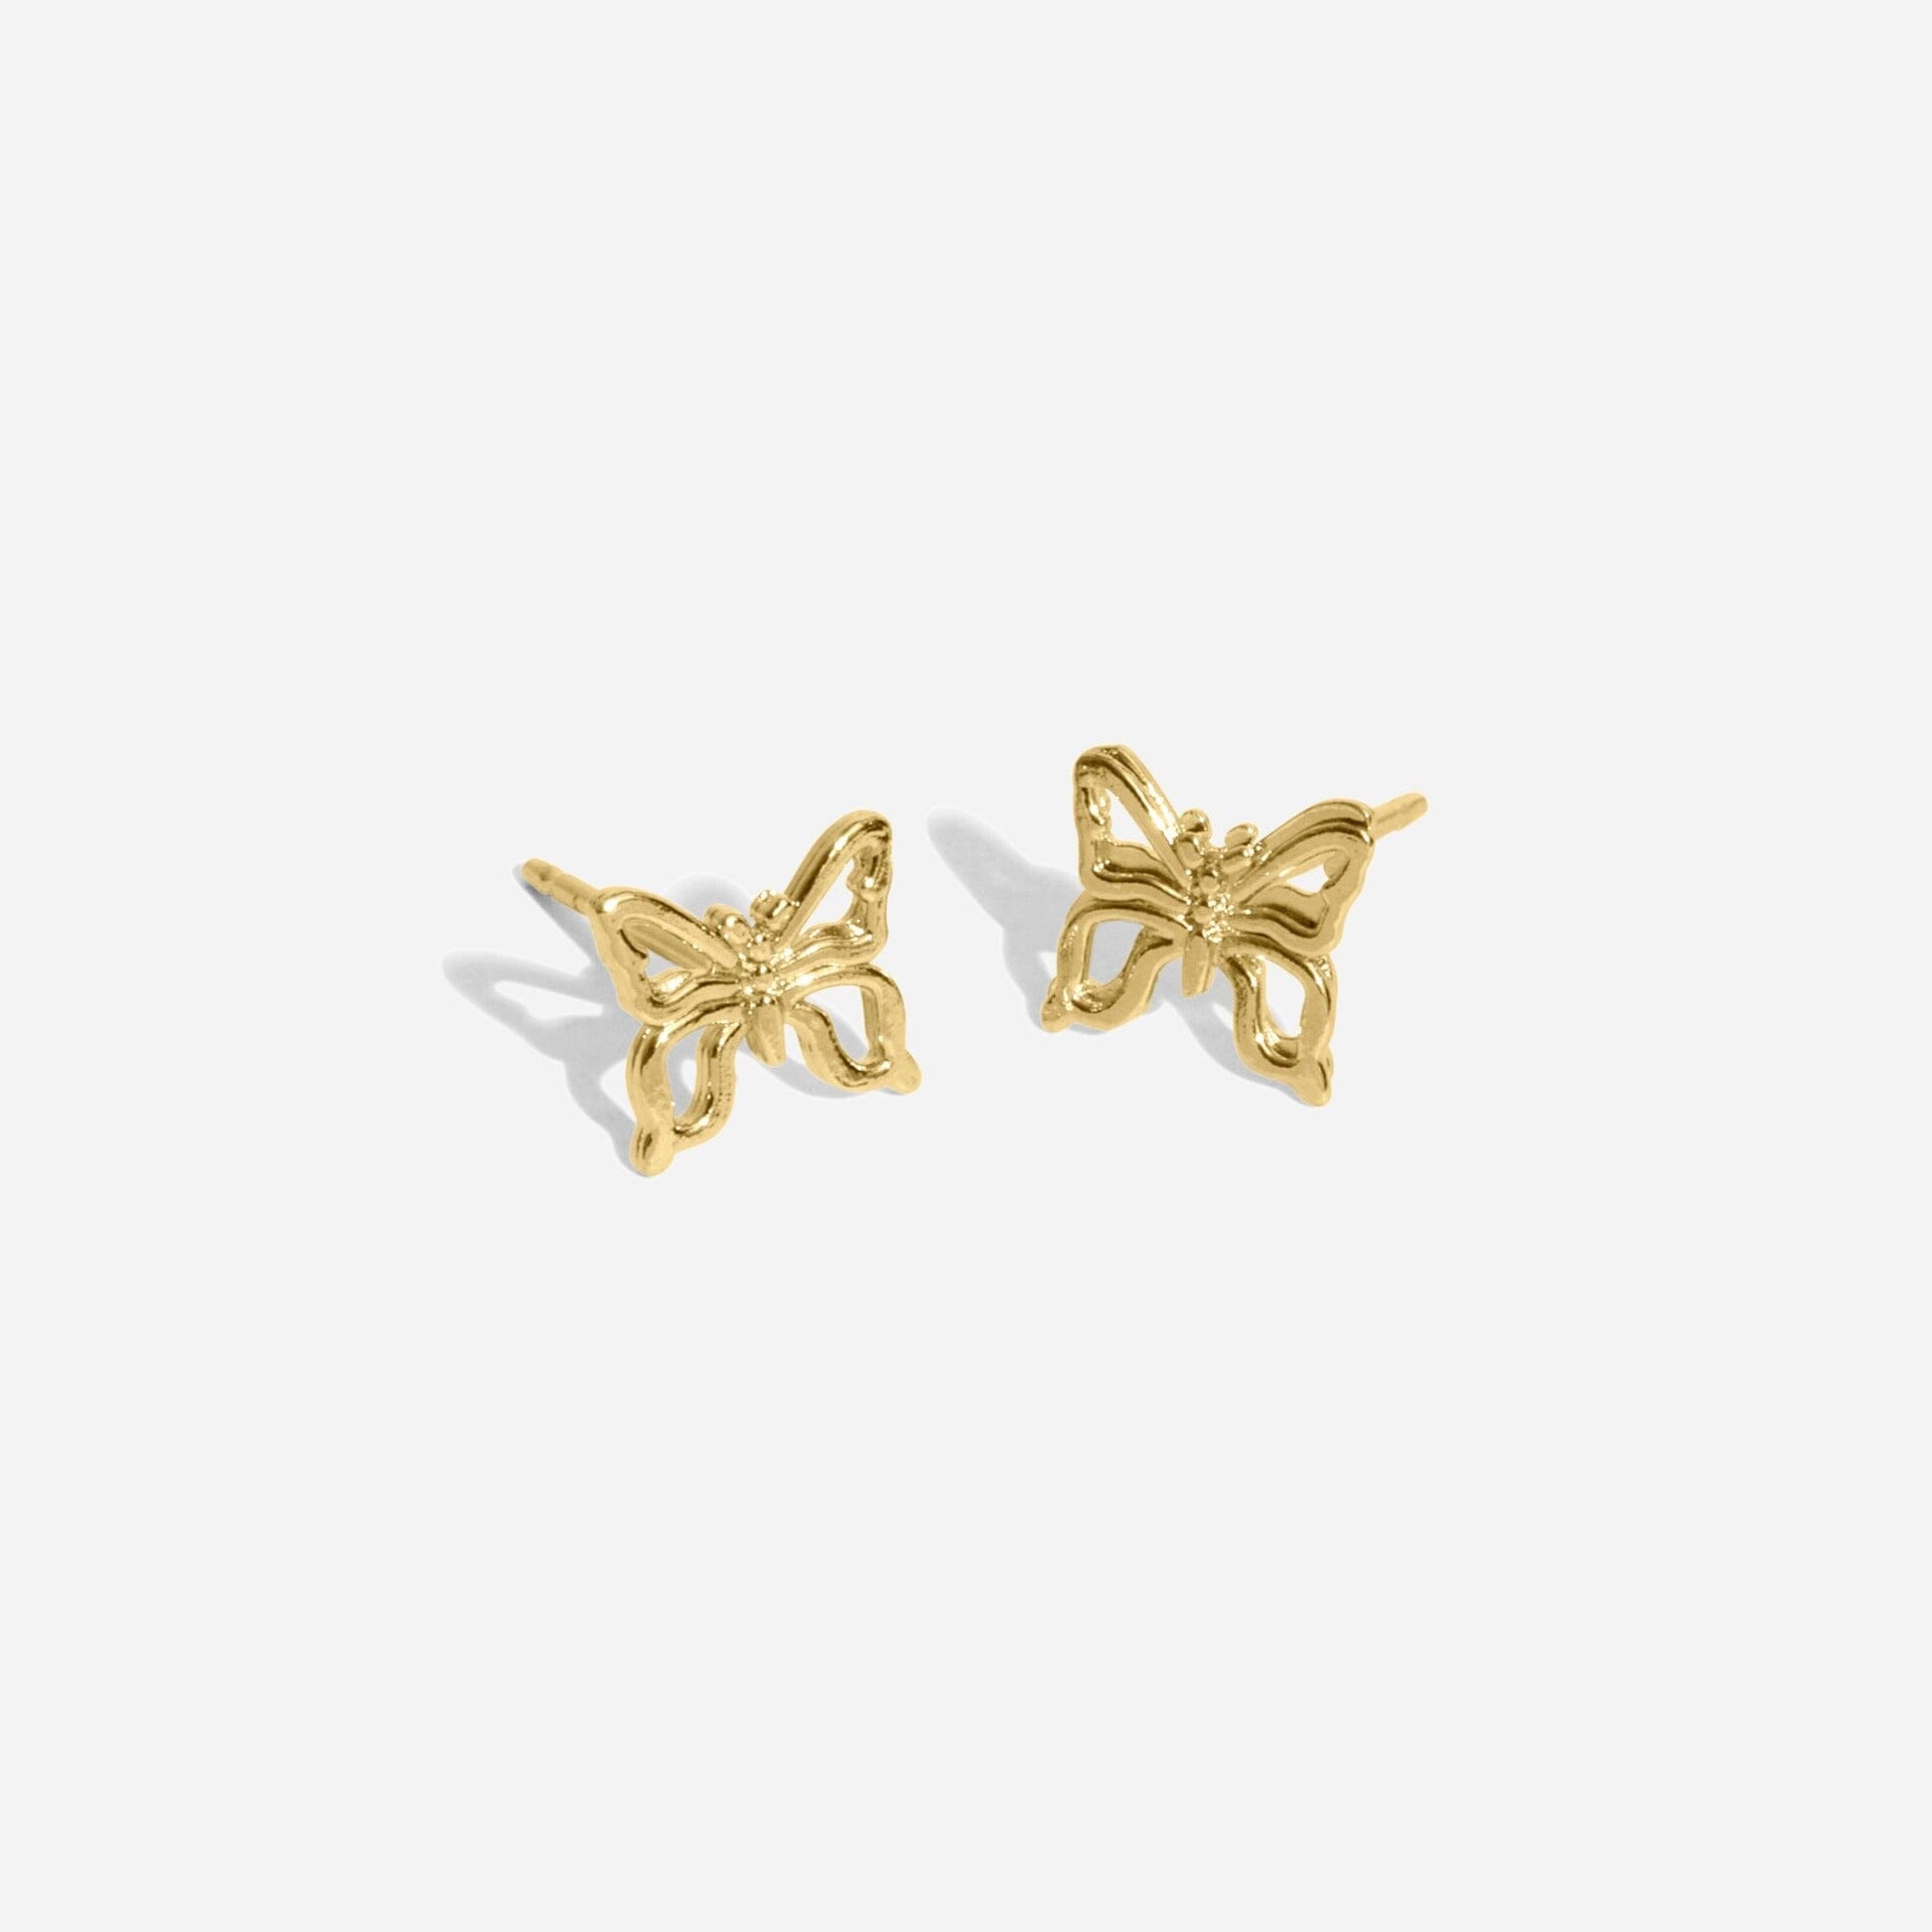 Dainty gold Butterfly Studs handmade in America by Katie Dean Jewelry, as seen on a natural white background, earrings made nickel-free and perfect for the dainty minimal jewelry lovers.